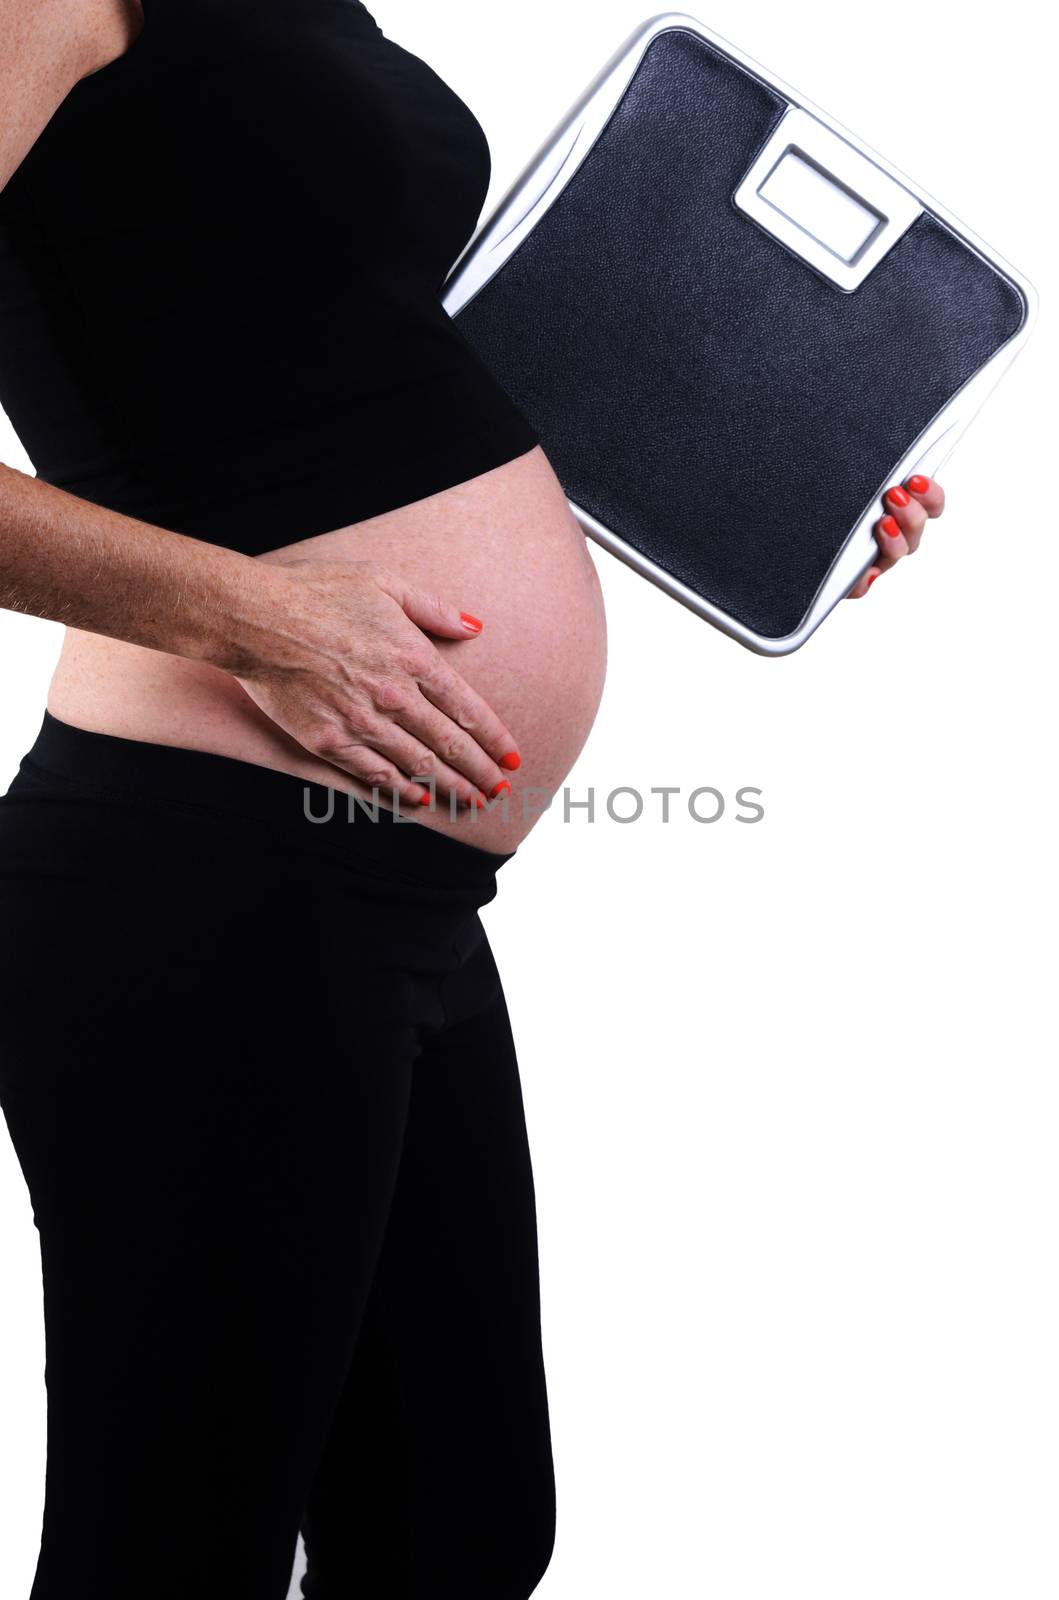 healthy weight gain during pregnancy with expectant mother holding scale
